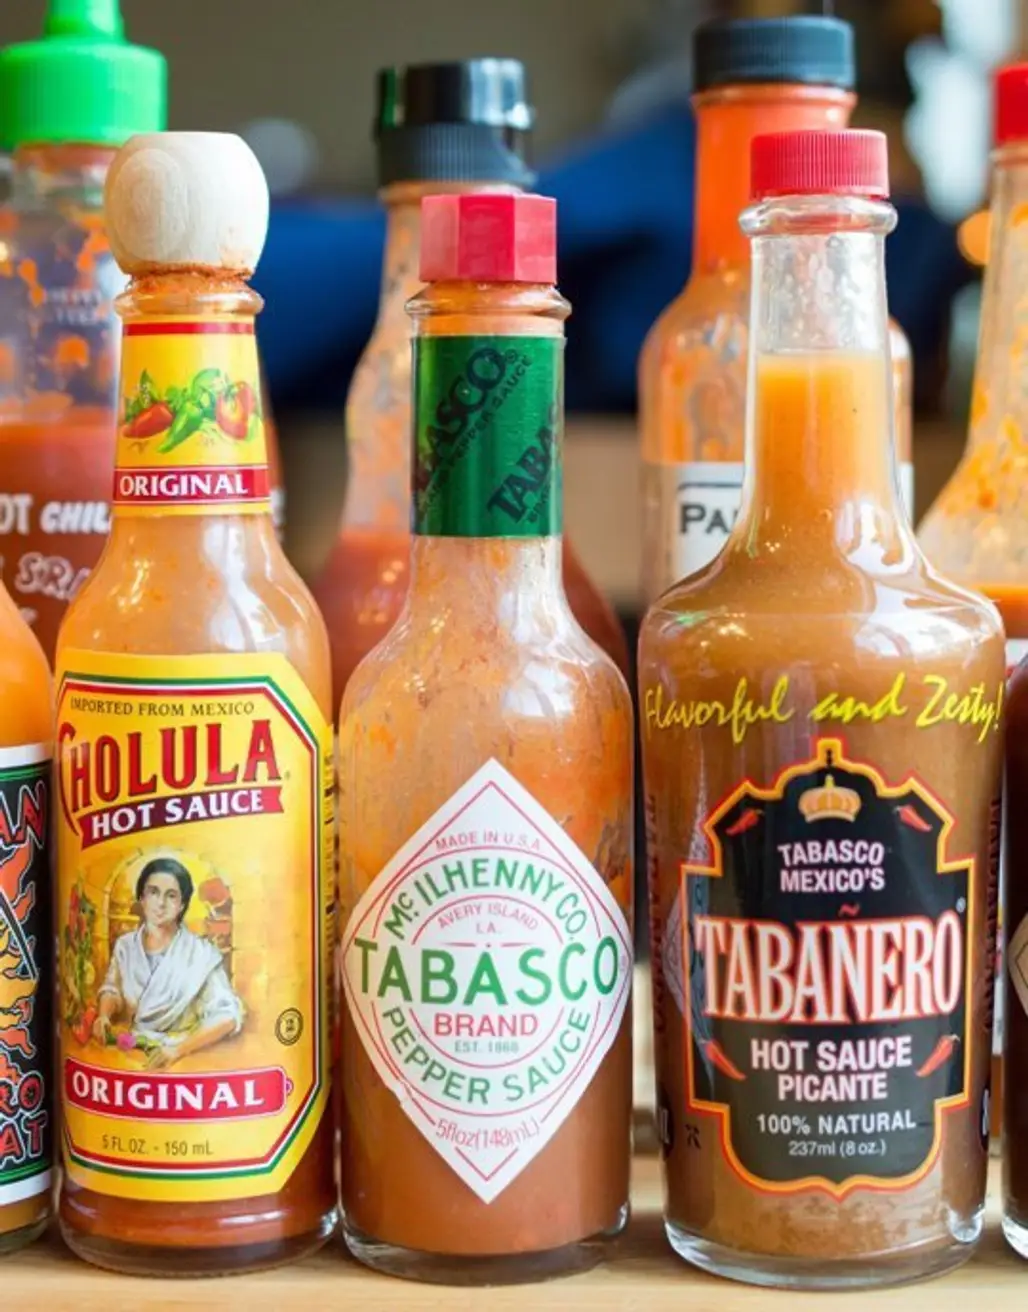 Look for New and Exciting Hot Sauces